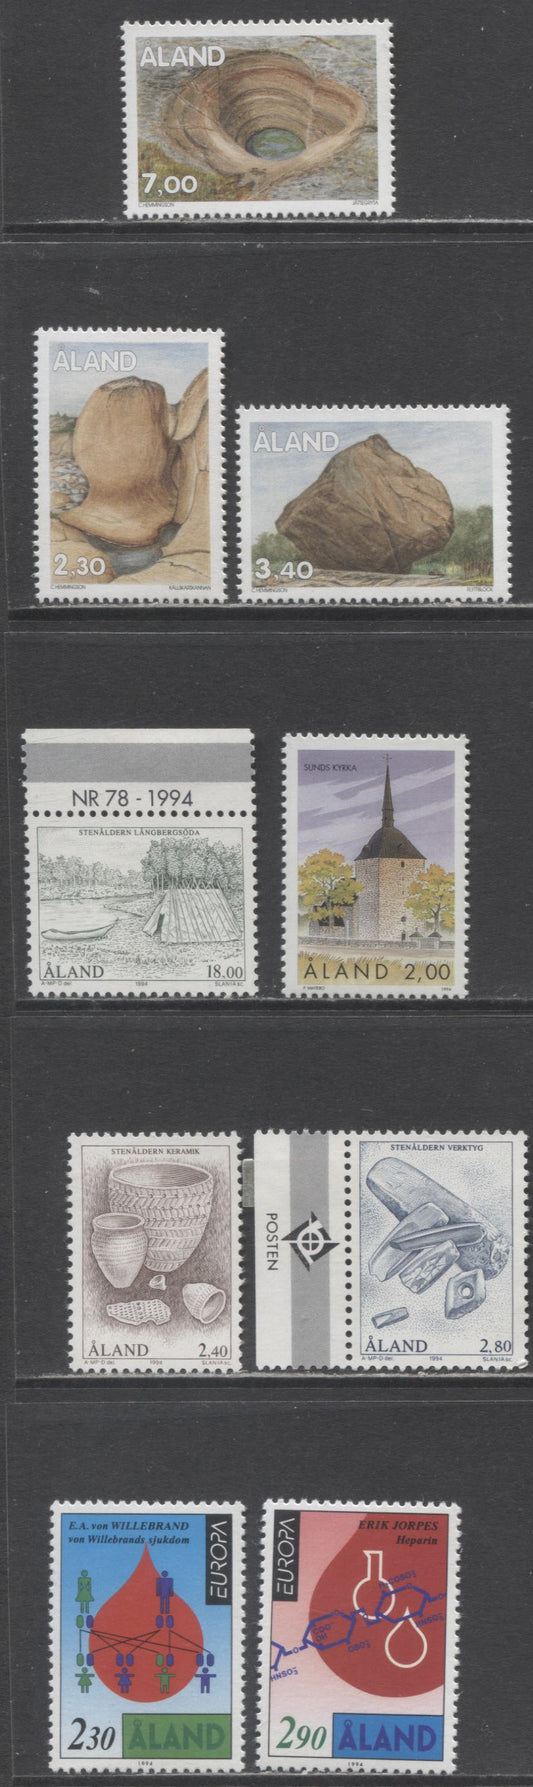 Lot 276 Aland SC#82/107 1994-2000 Europa, Stone Age, Churches & Stones Issues, 9 VFNH Singles, Click on Listing to See ALL Pictures, 2017 Scott Cat. $24.65